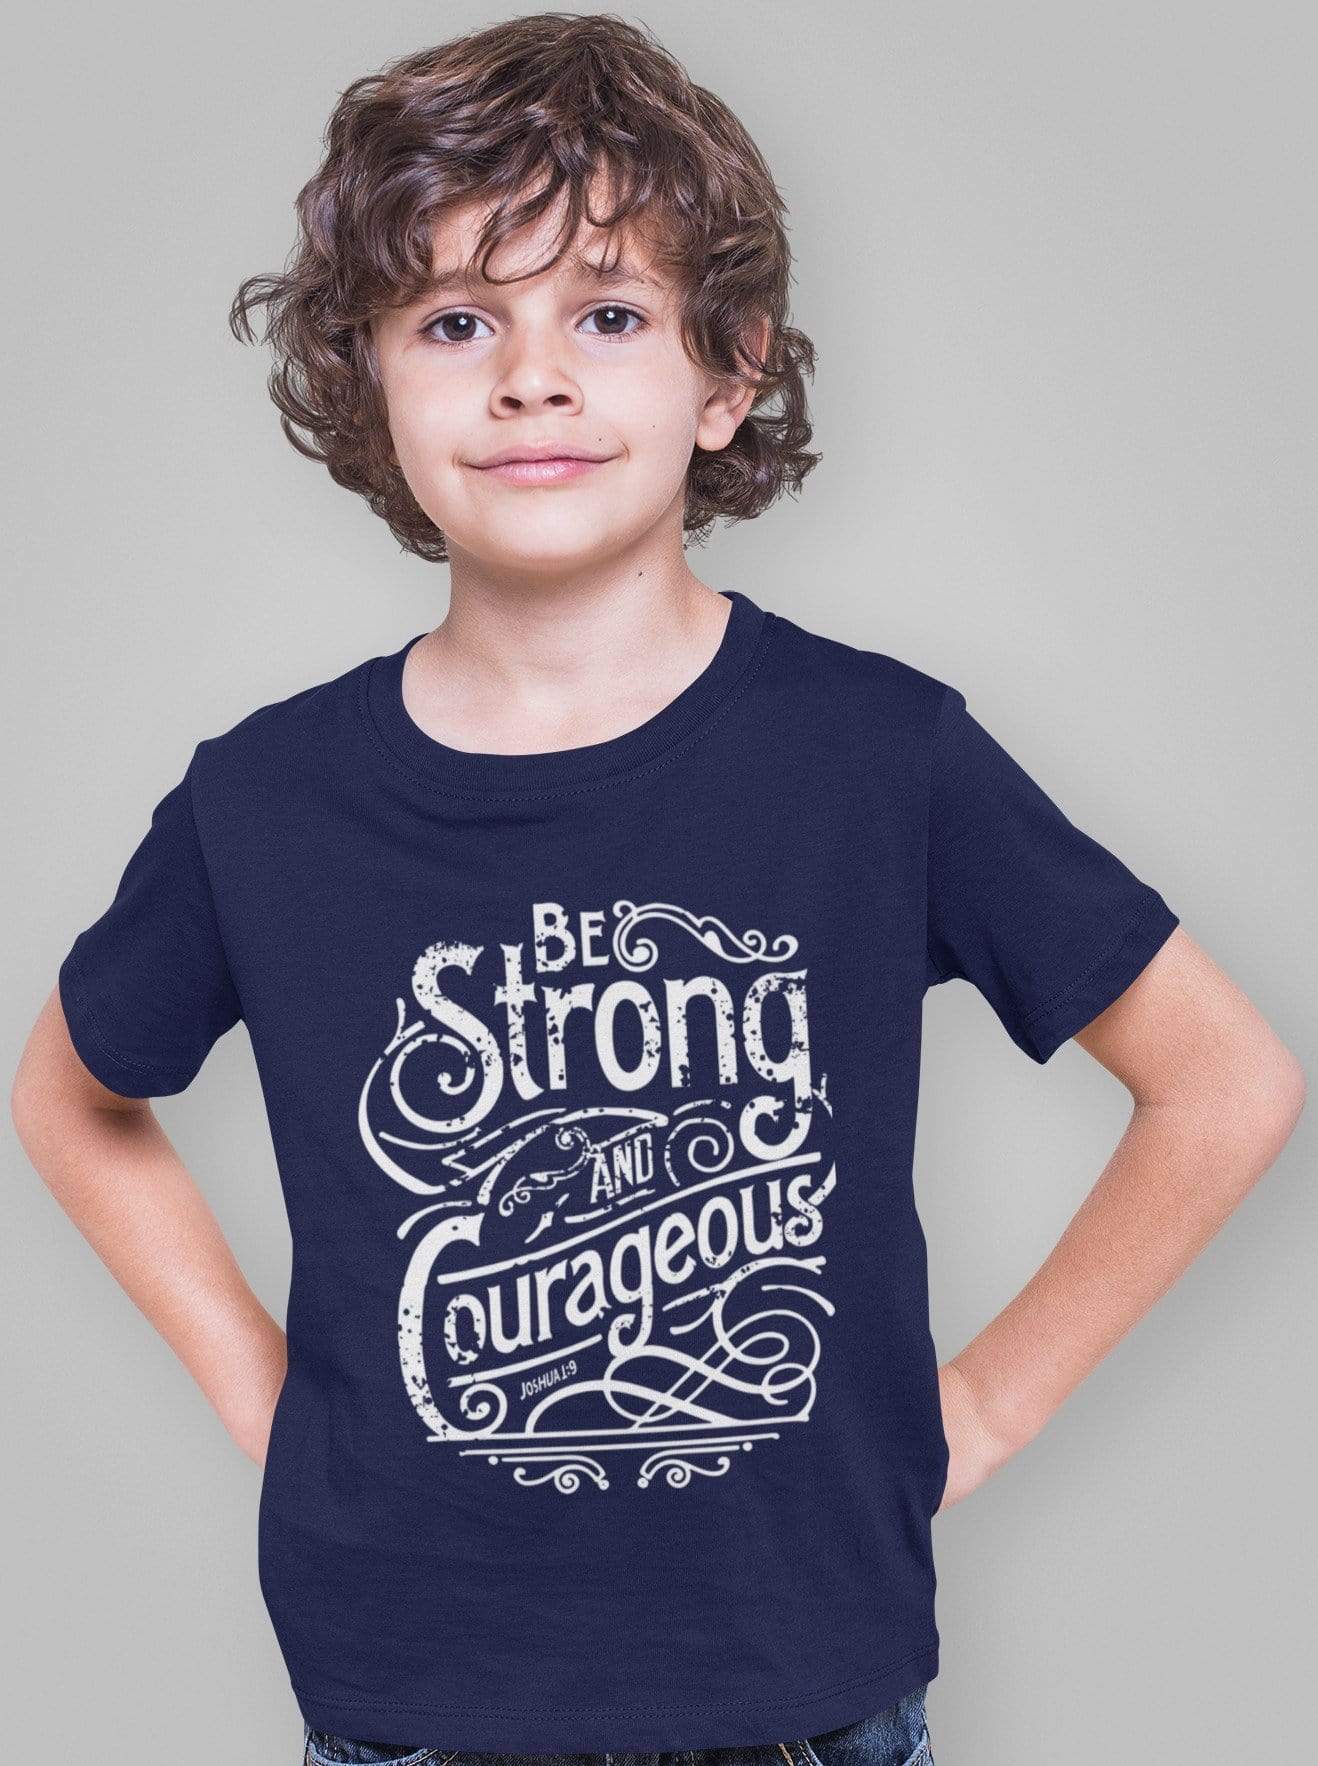 Living Words Kids Round Neck T Shirt Boy / 0-12 Mn / Navy Blue Be strong